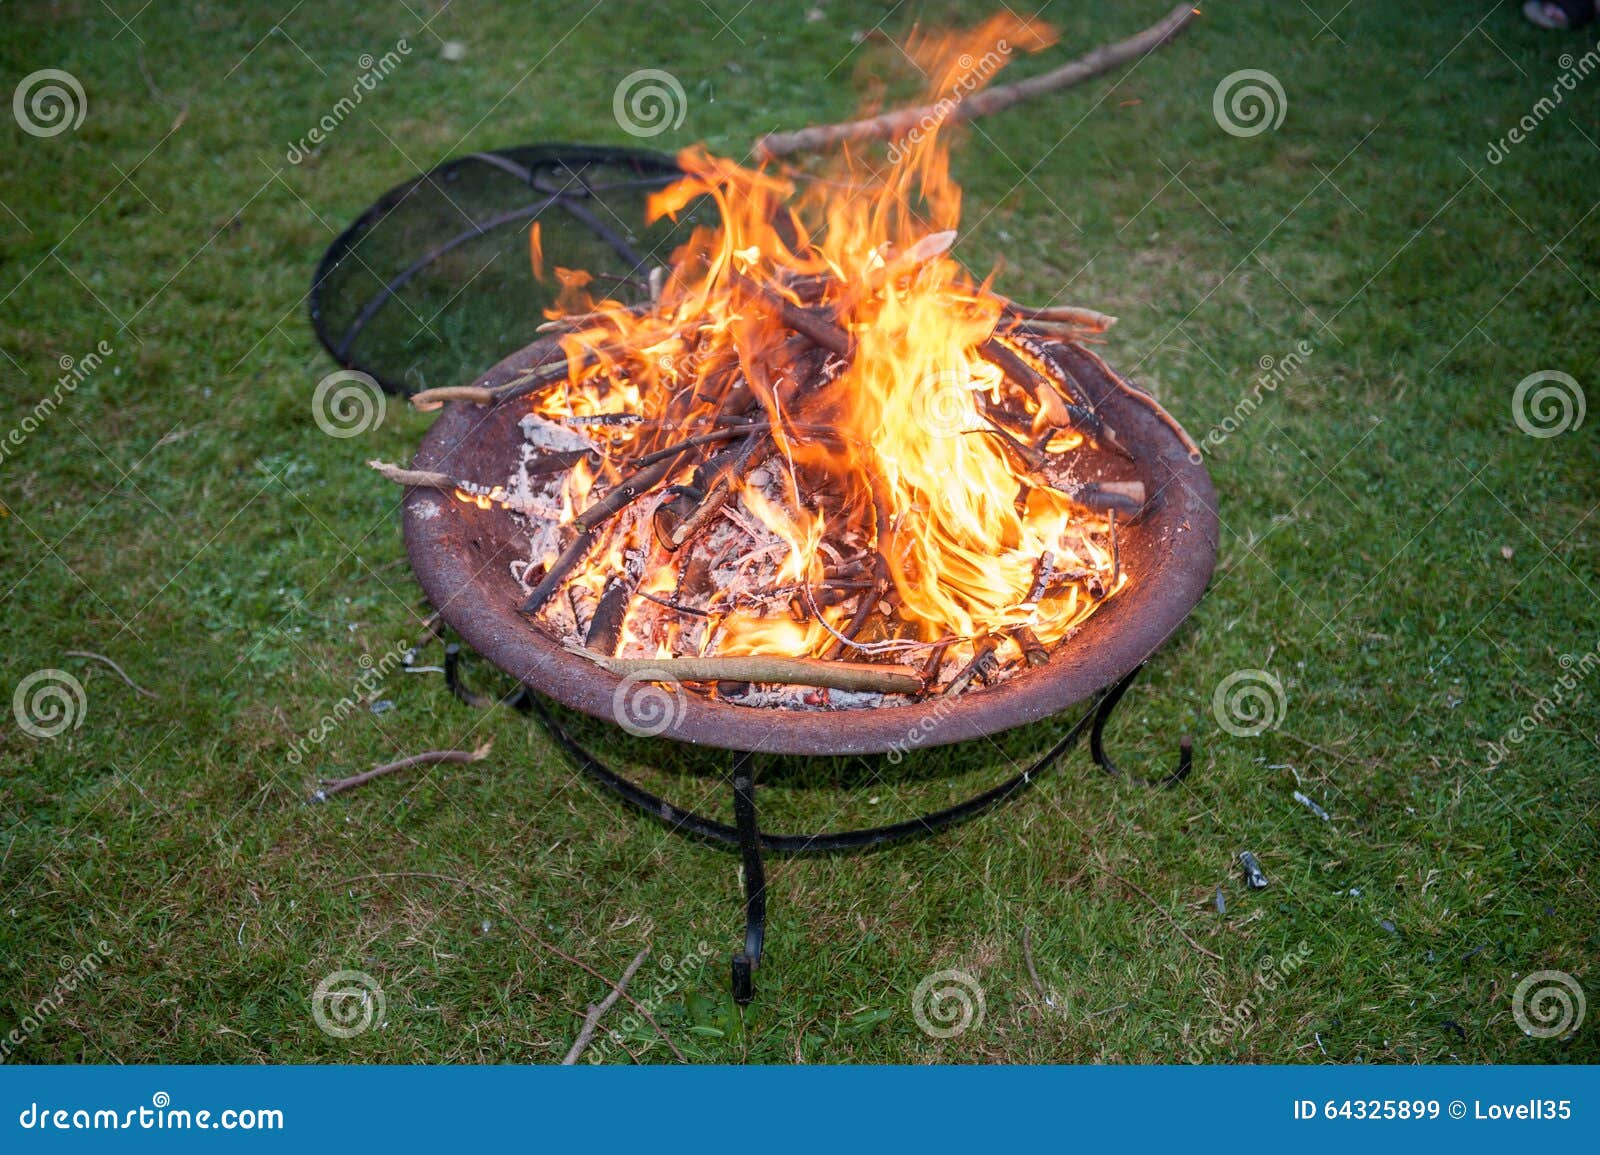 Flames on a Garden Fire Pit Stock Image - Image of flames, burst: 64325899